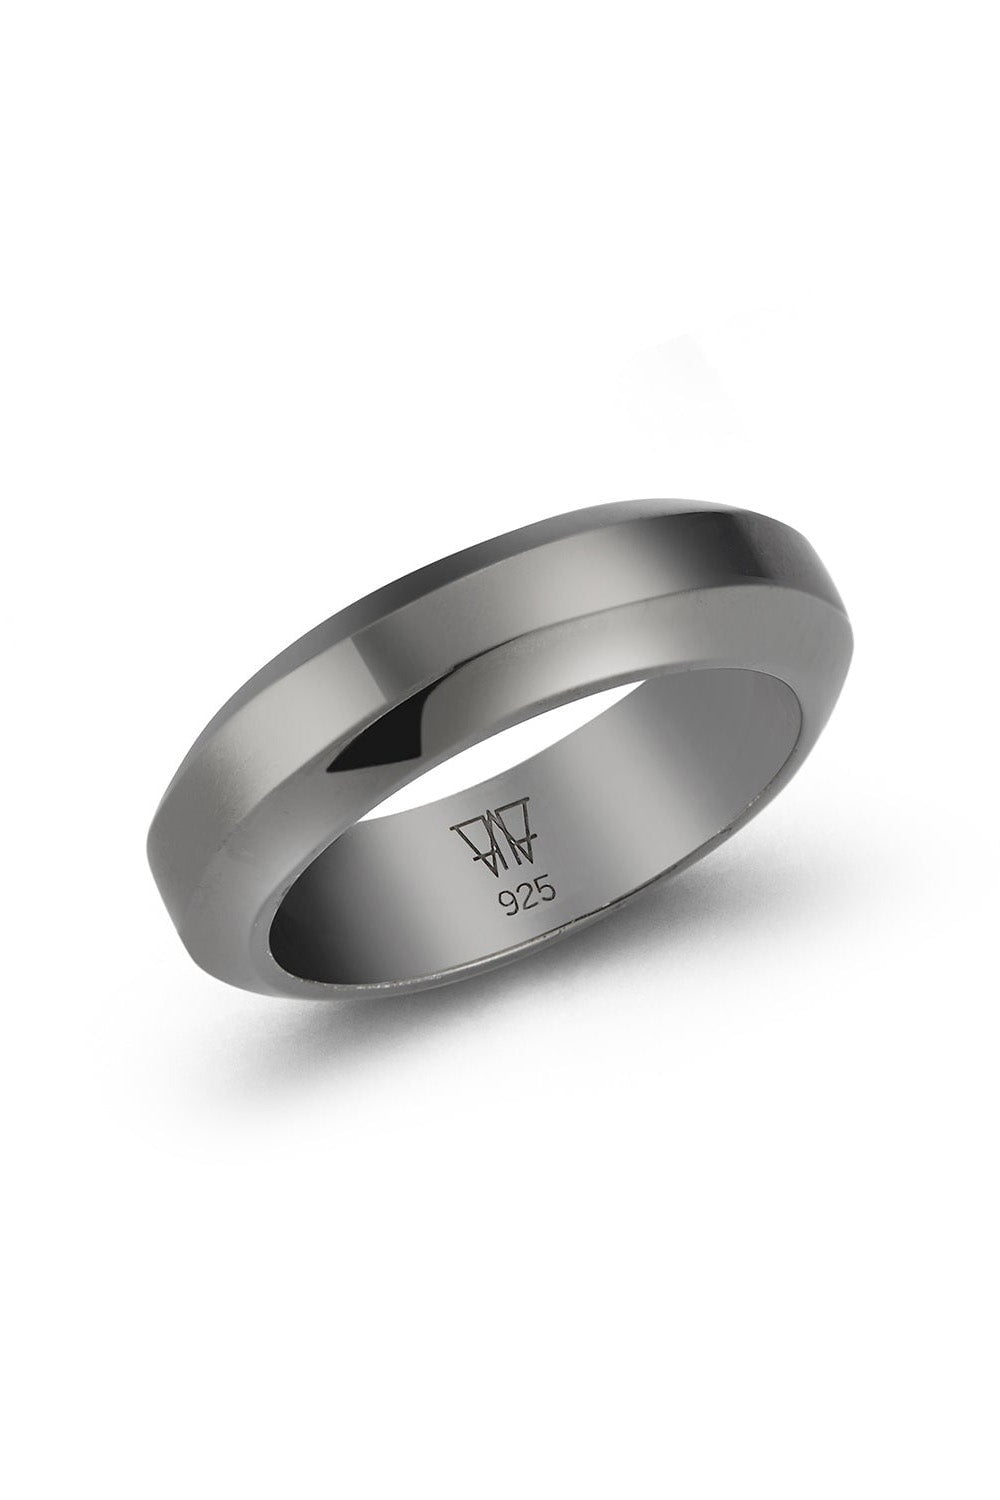 WALTERS FAITH-Grant Band Ring-SILVER